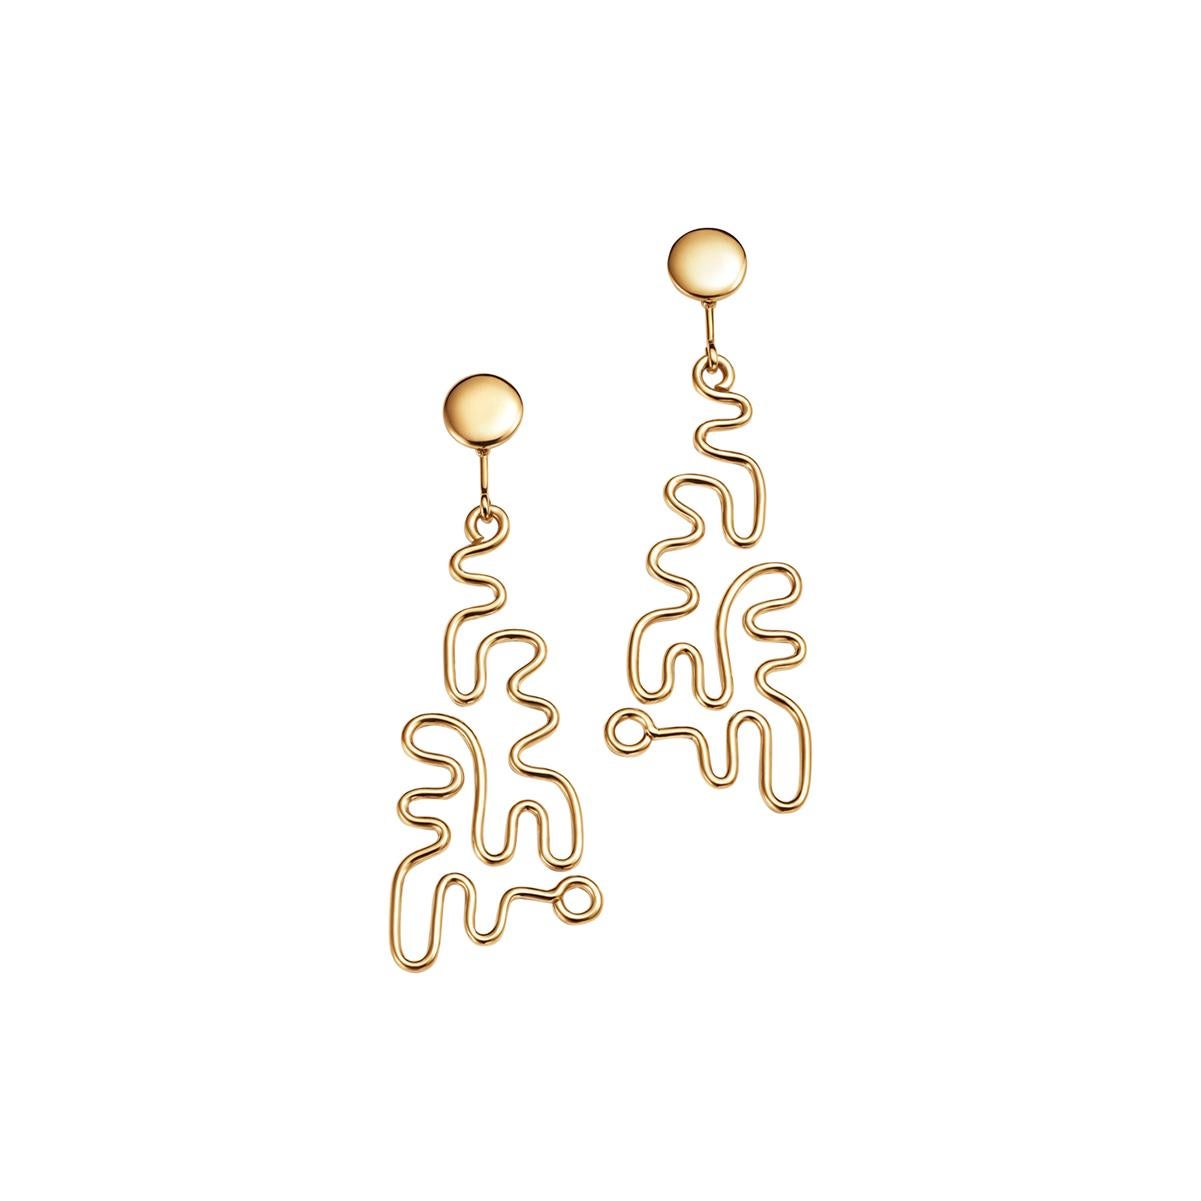 18kt Fairmined Ecological Yellow Gold Milton Cavagnaro Puzzle Earrings